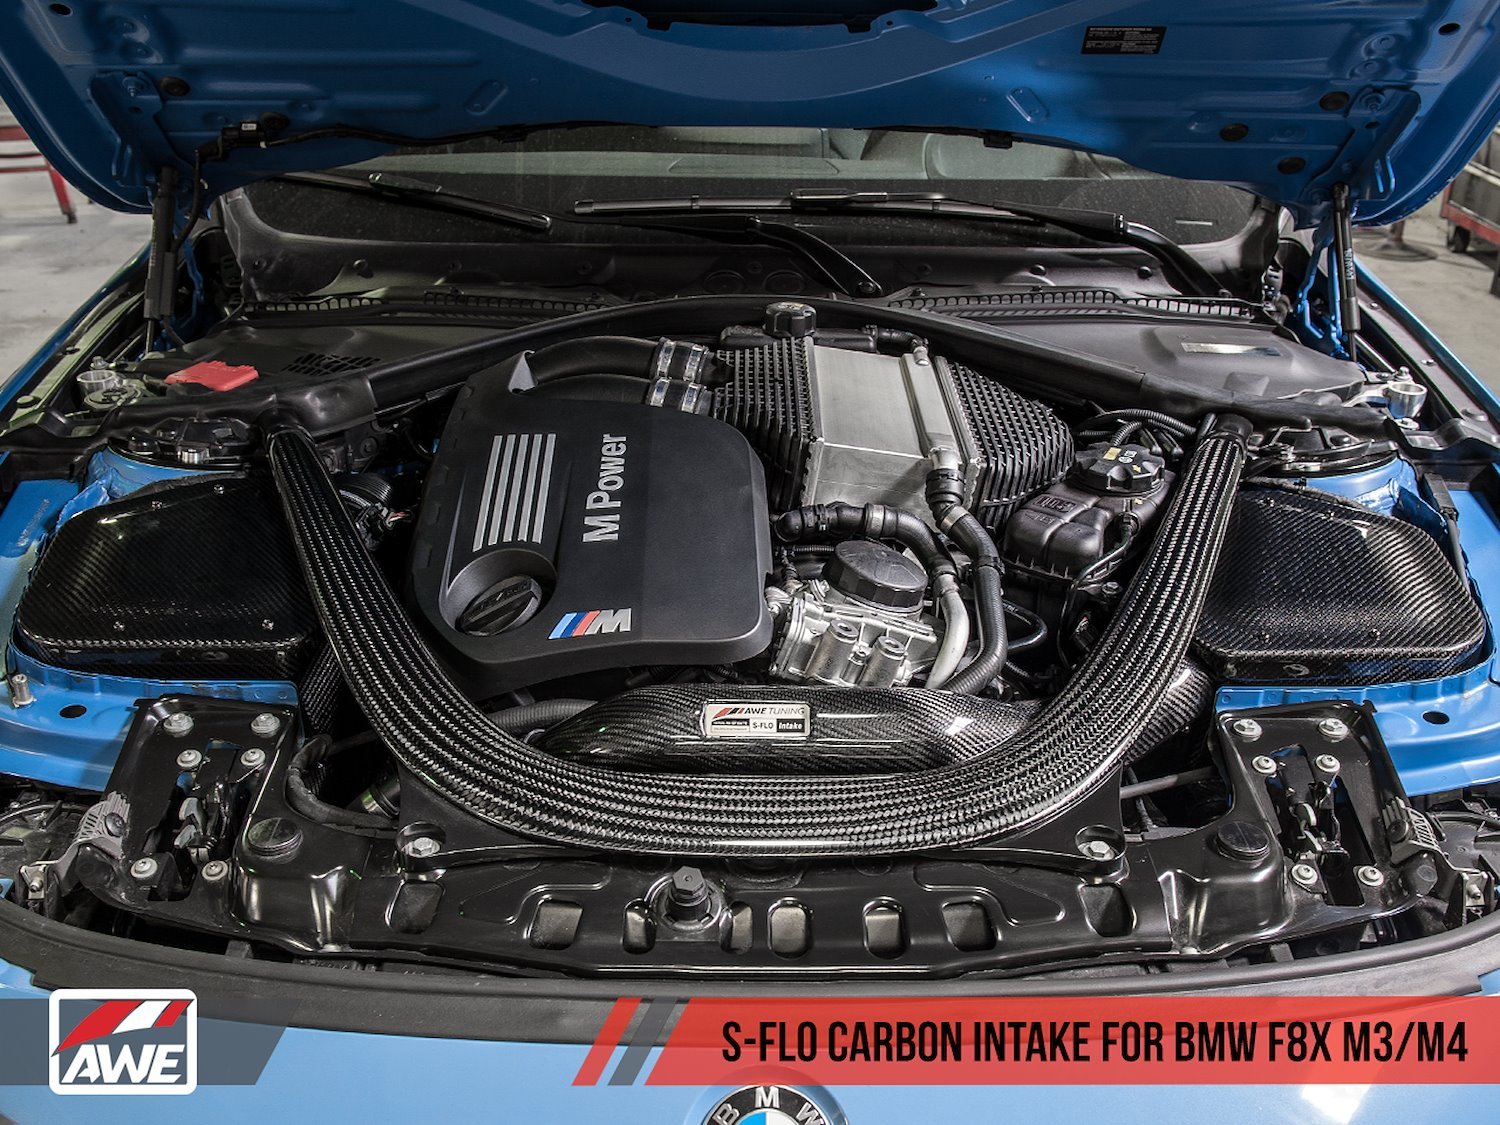 S-FLO Carbon Intake for BMW F8X M3 /